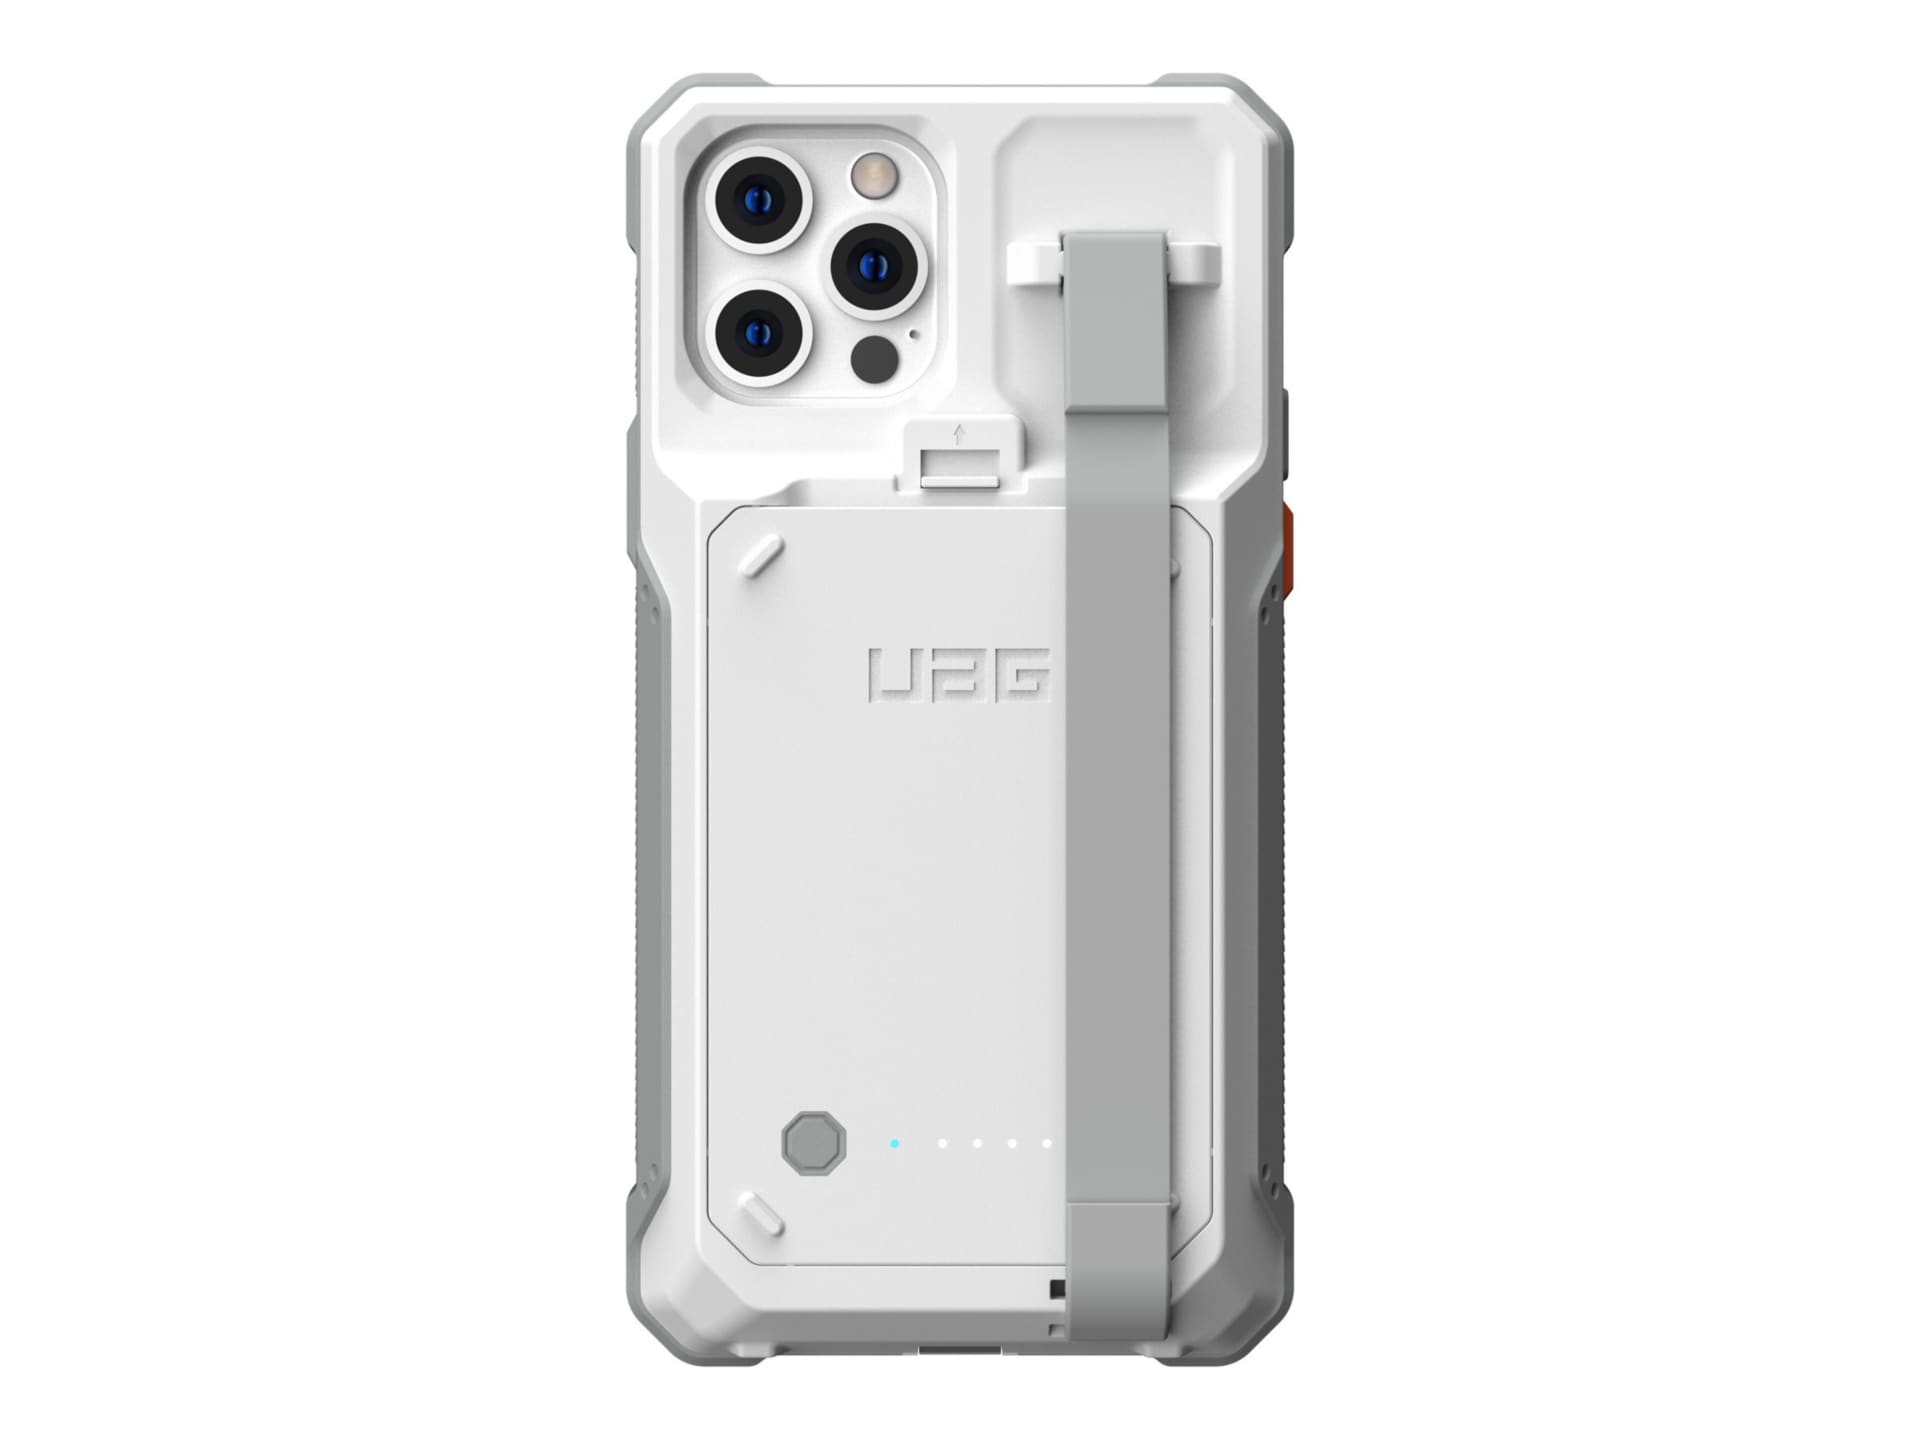 UAG Rugged Workflow Battery Case for iPhone 12 / 12 Pro Healthcare- White